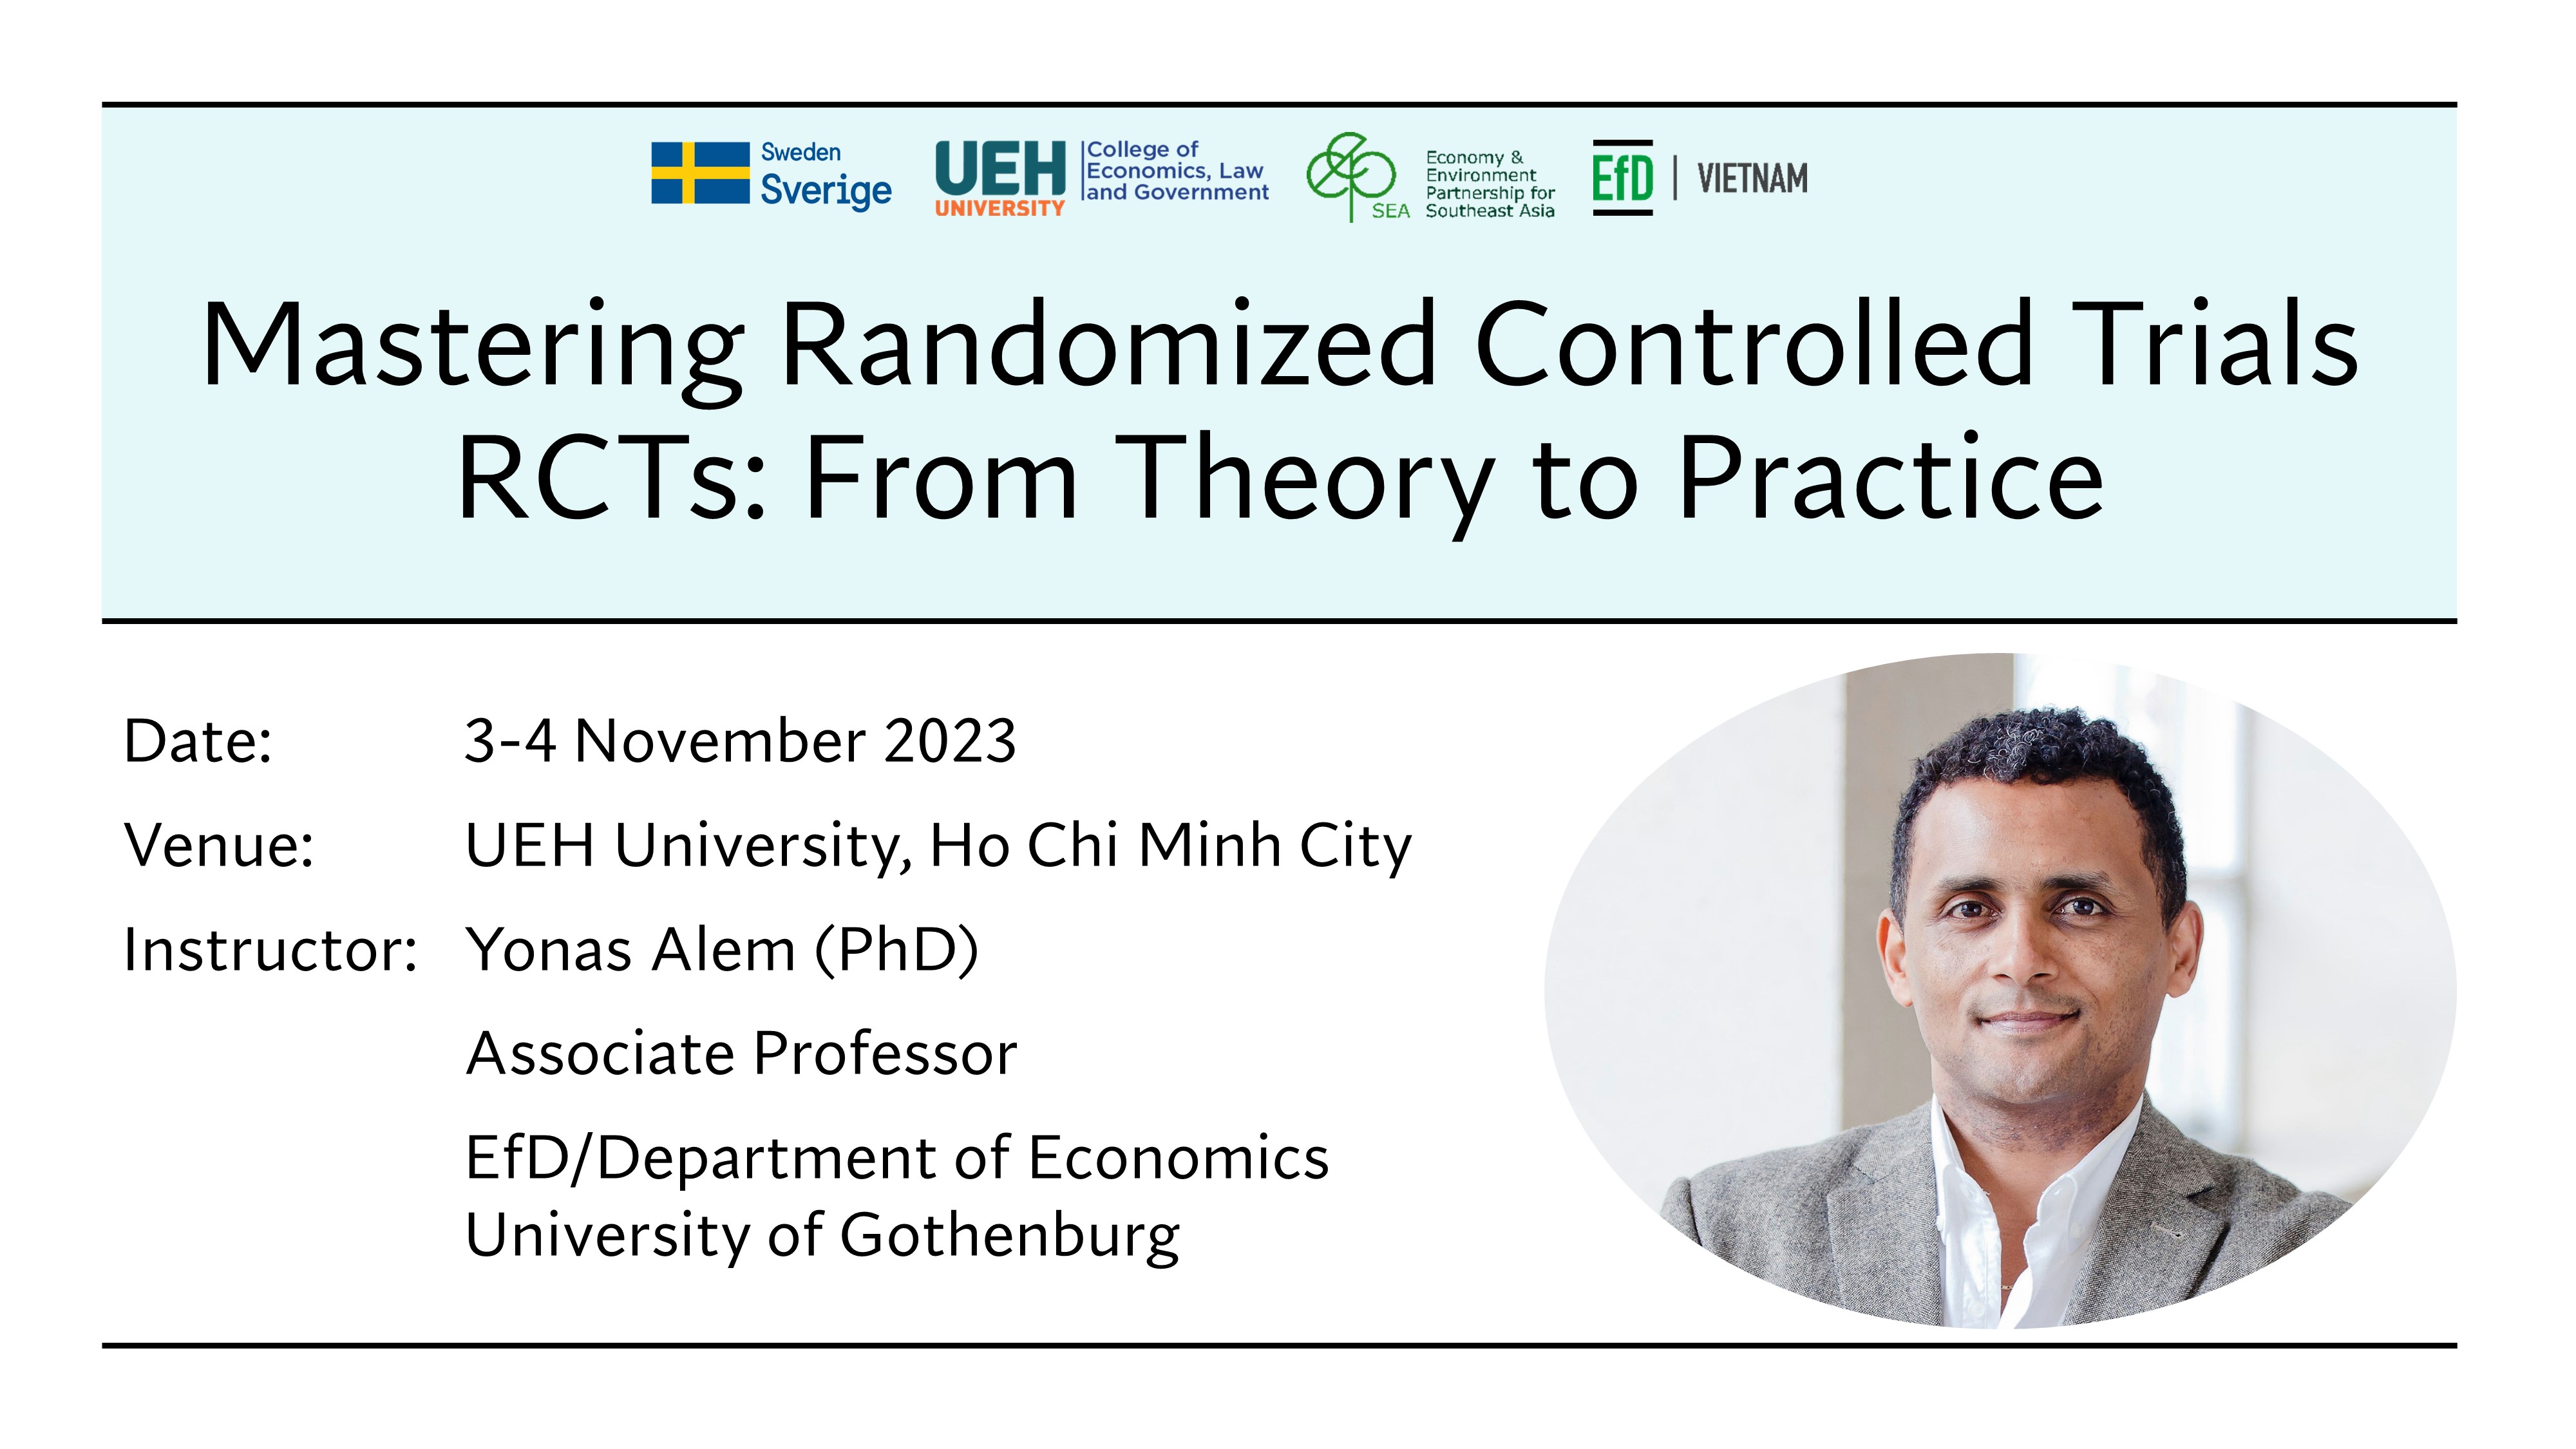 Workshop on Randomized Controlled Trials (RCTs): From Theory to Practice